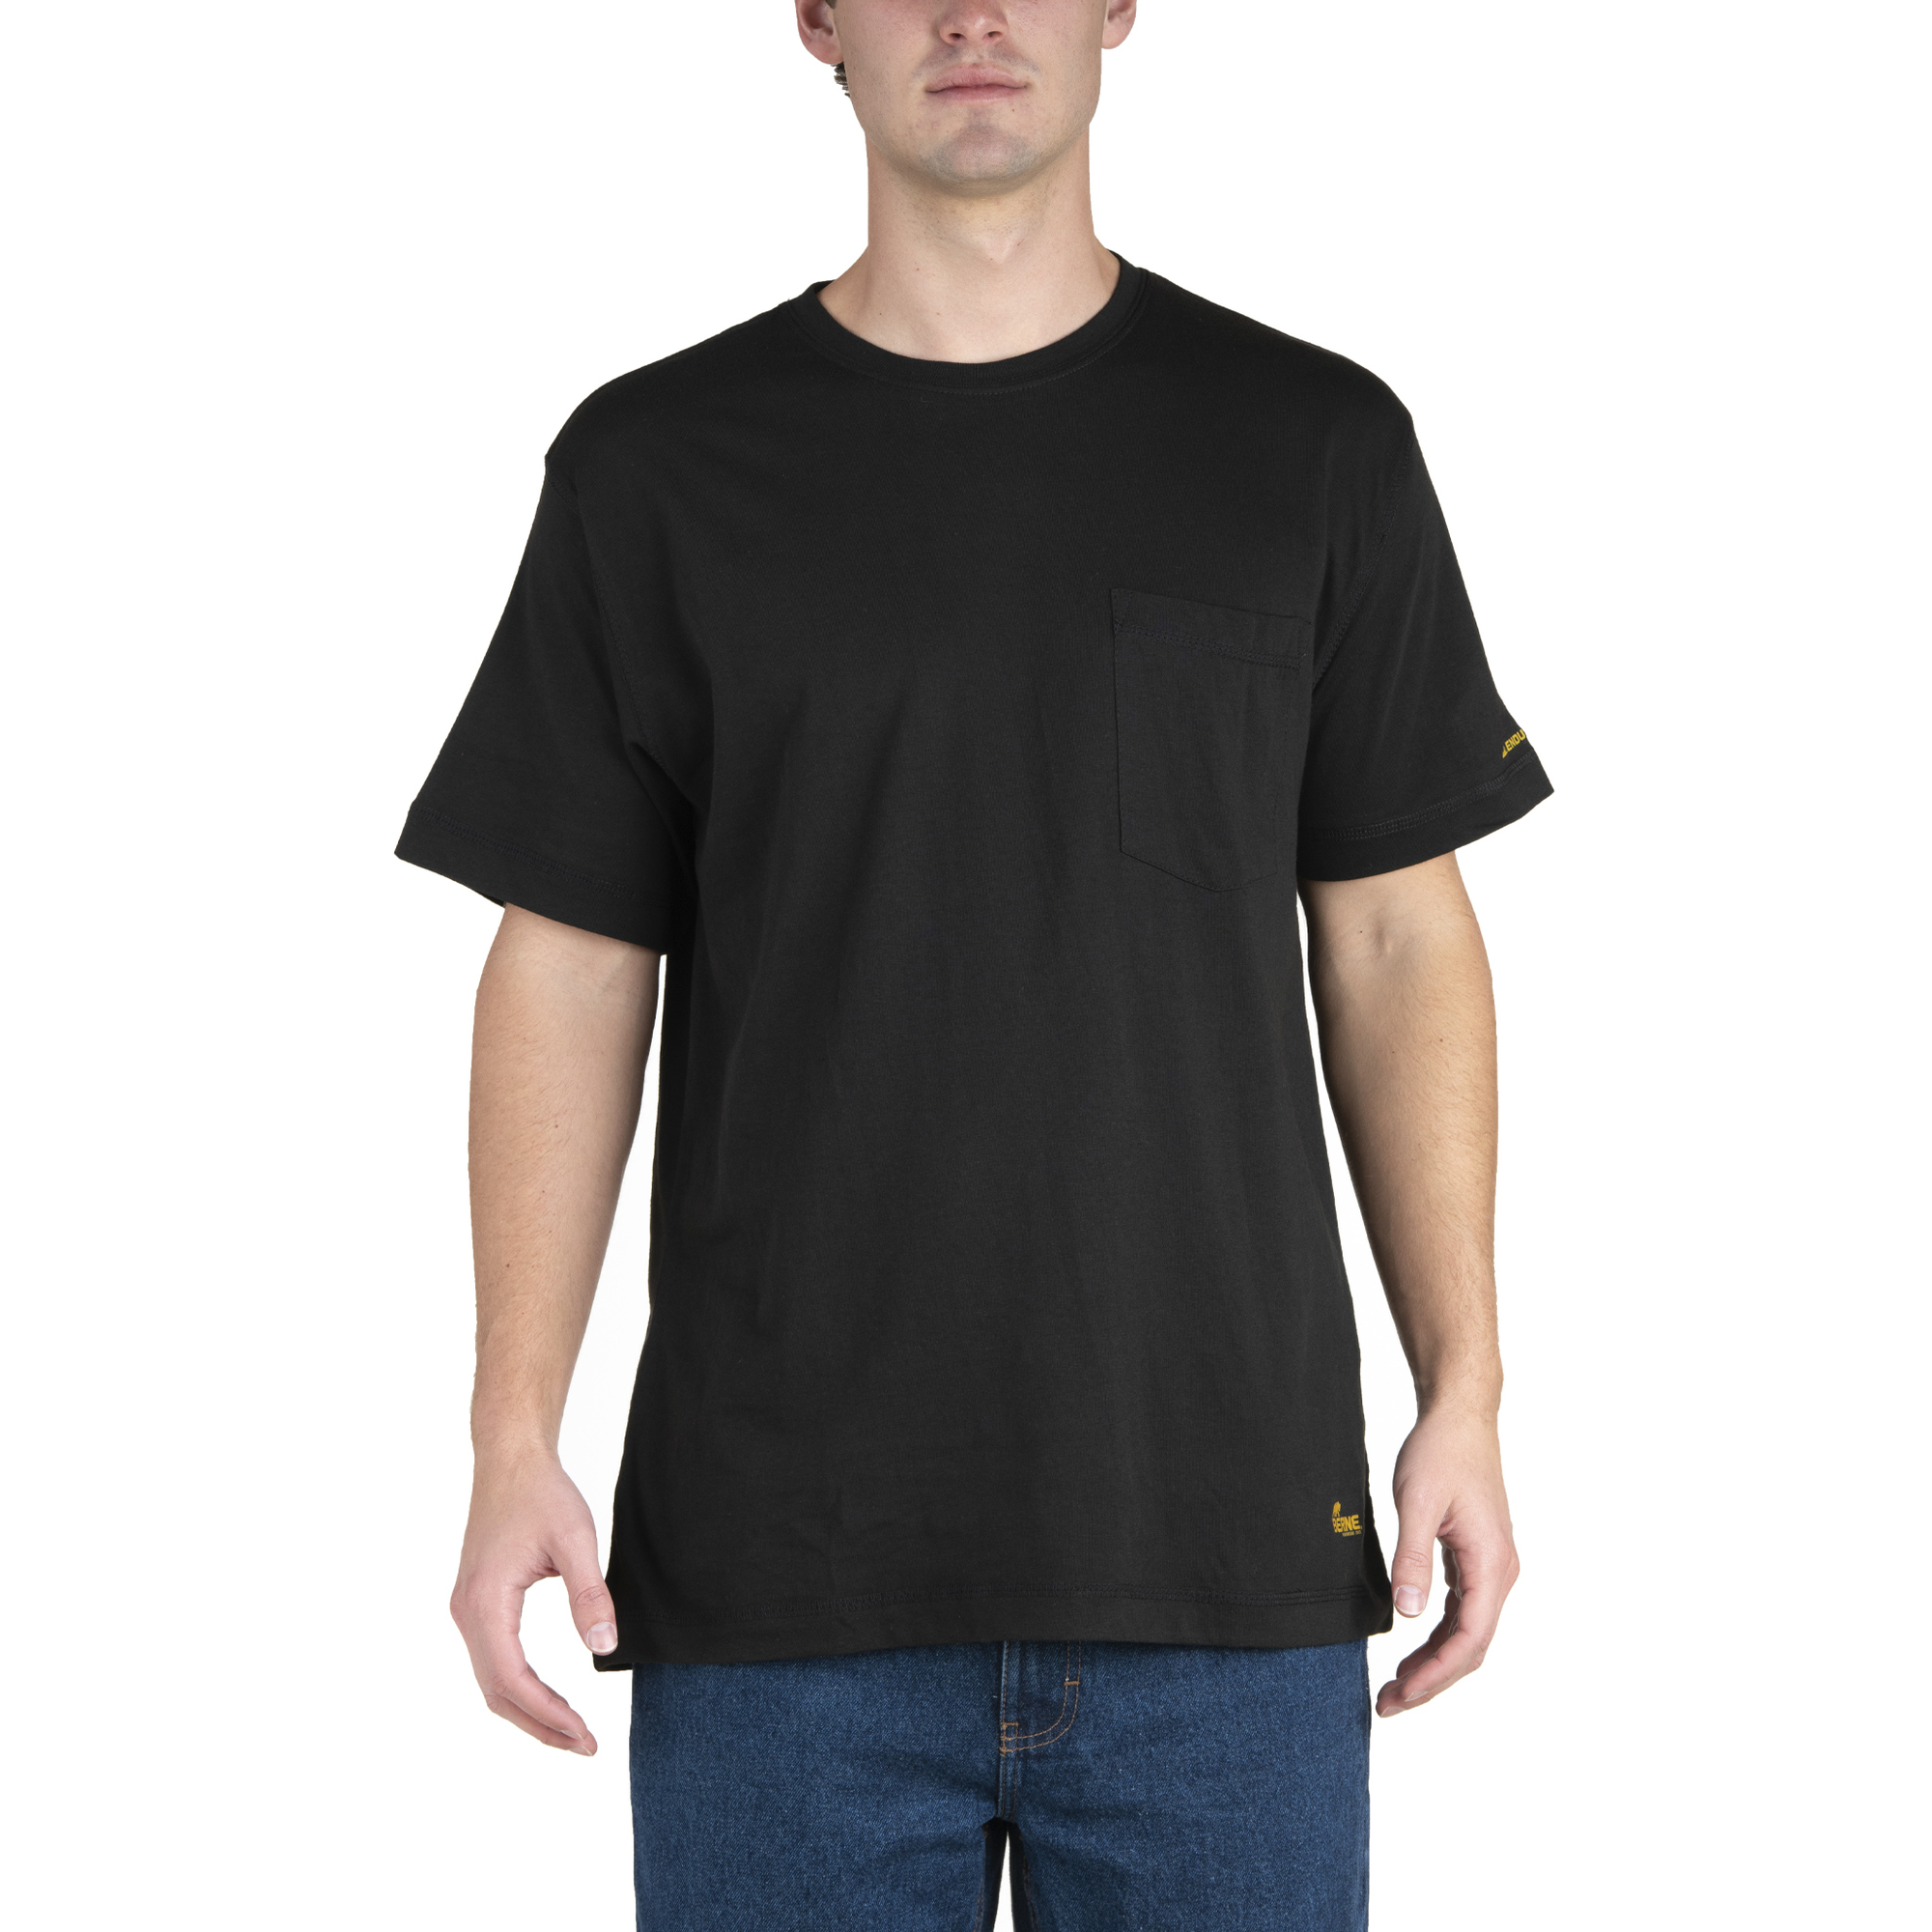 Berne Apparel, Lightweight Performance Tee-Style, Size LT, Color Black, Material 60% Cotton 40% Polyester, Model BSM38